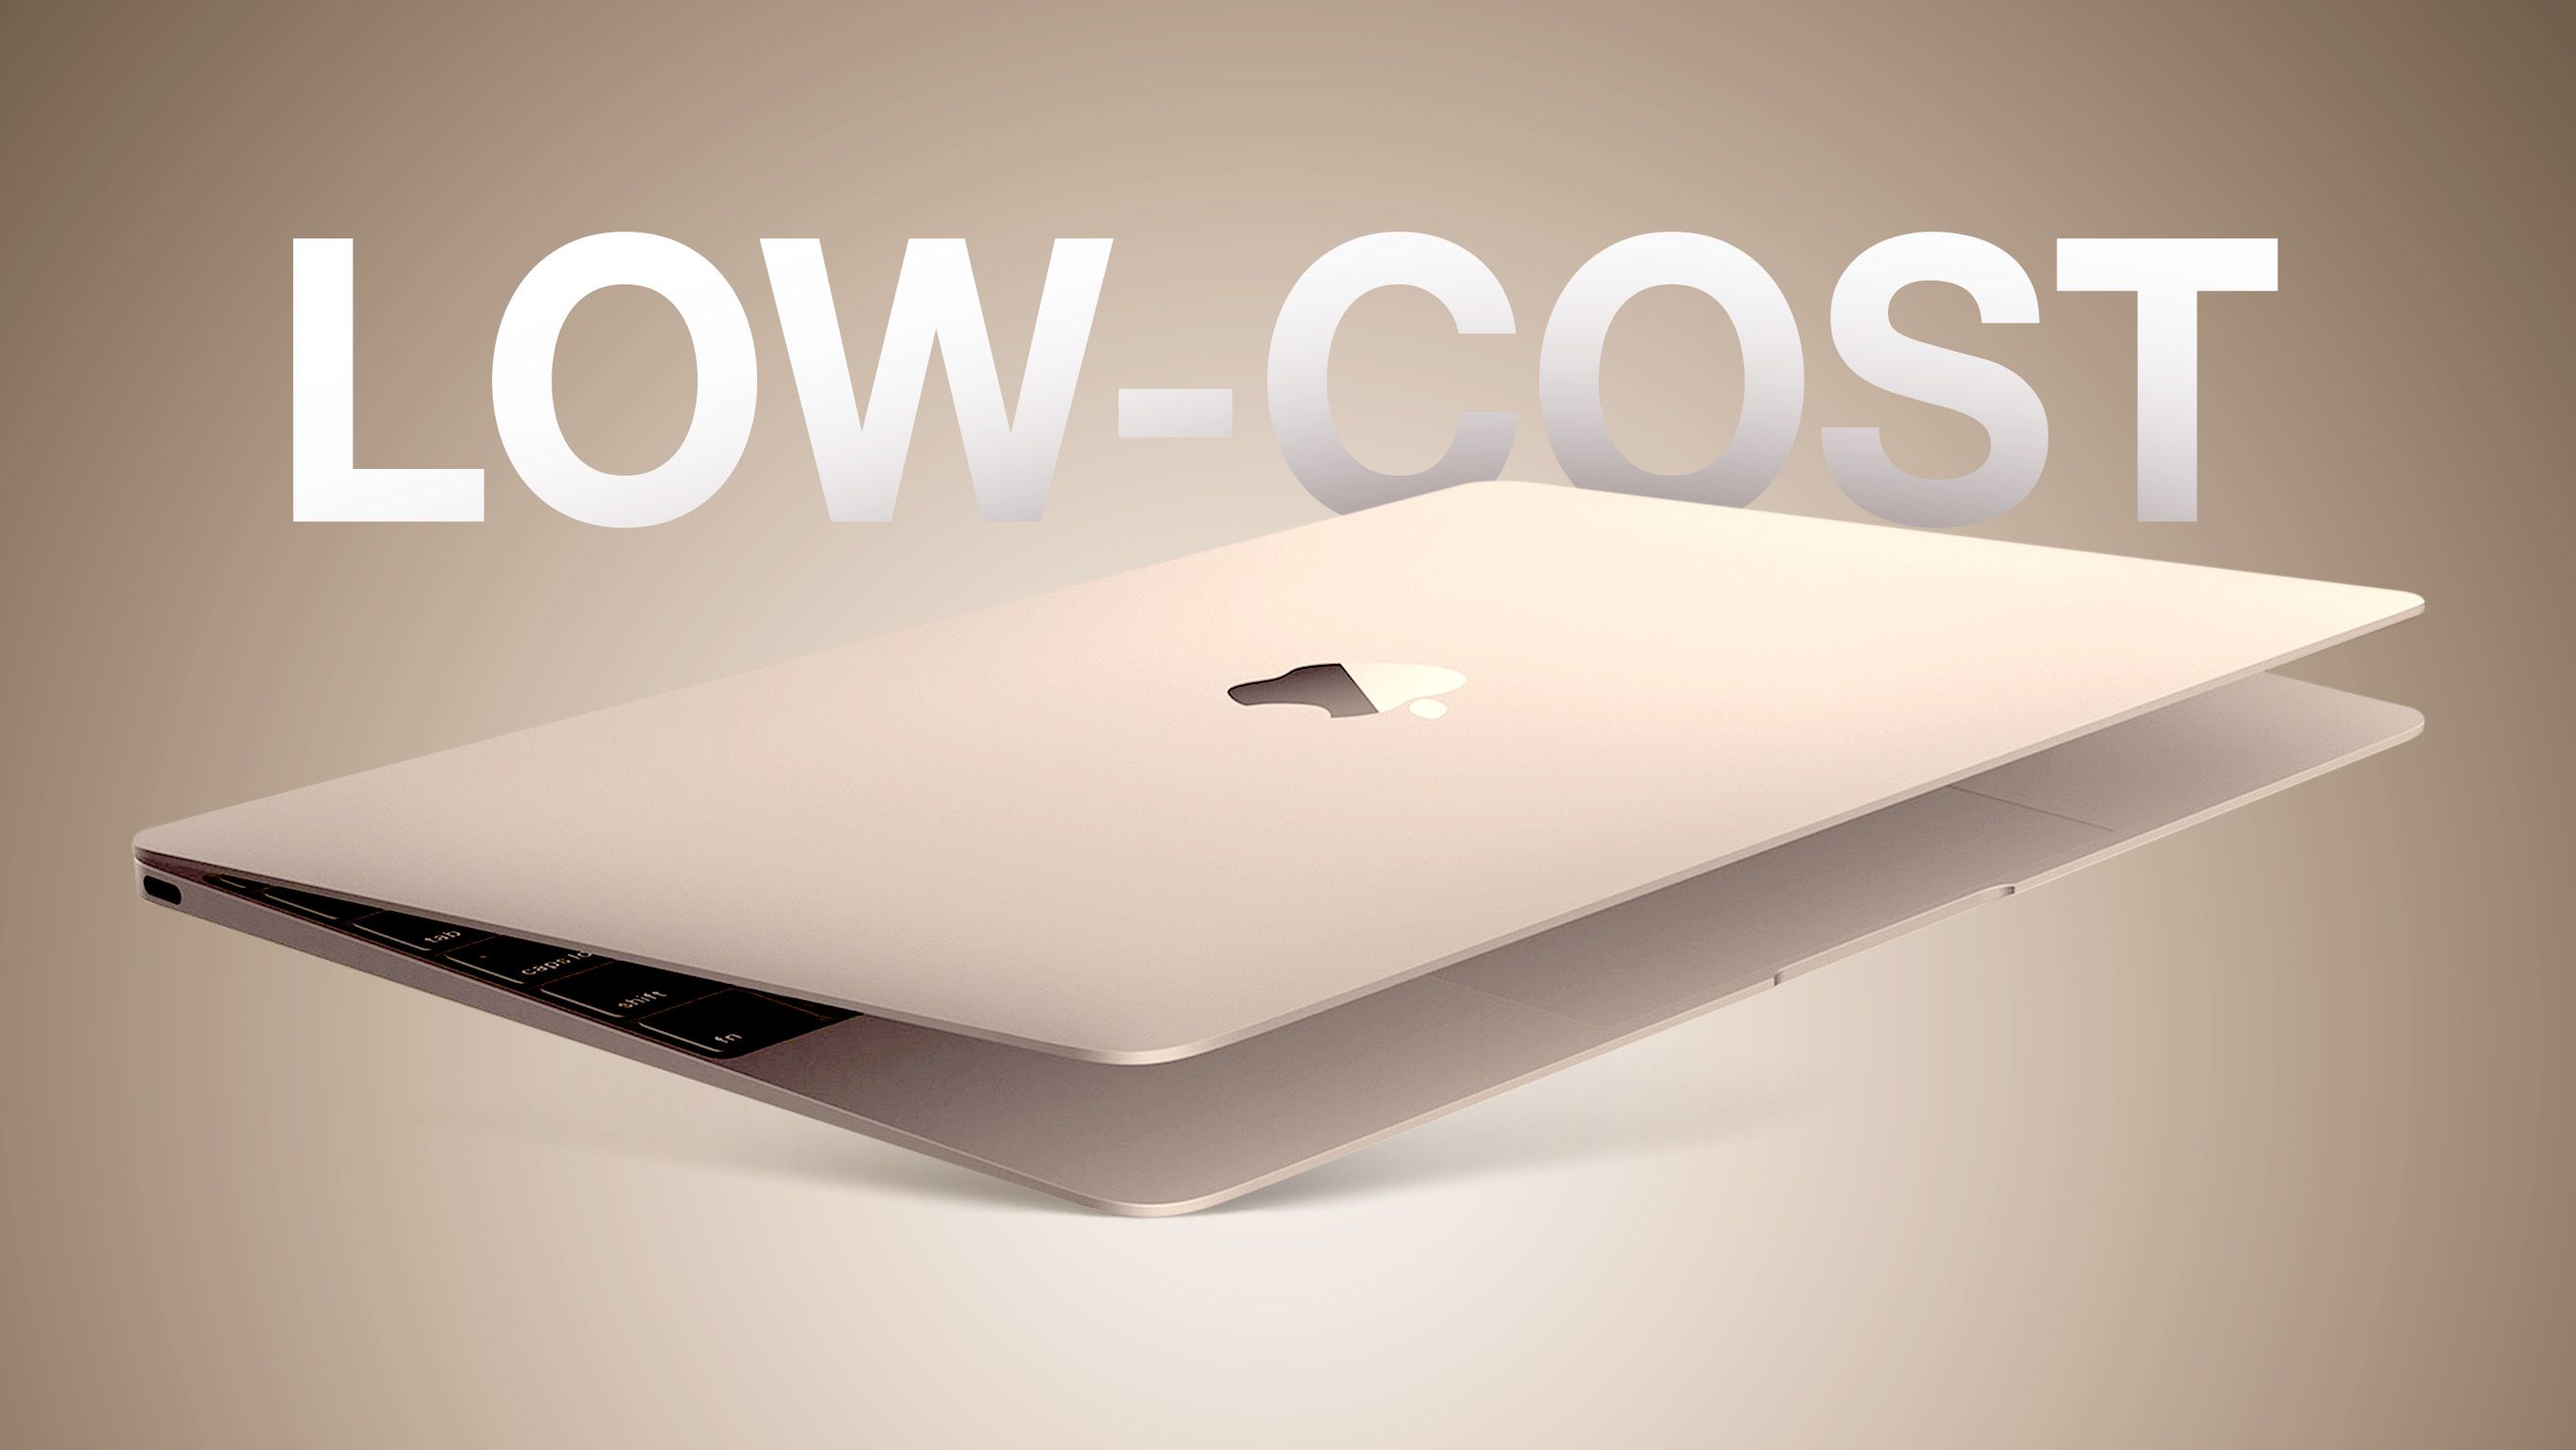 Low-Cost Apple MacBook Said to Come in 12-inch and 13-inch Sizes - macrumors.com